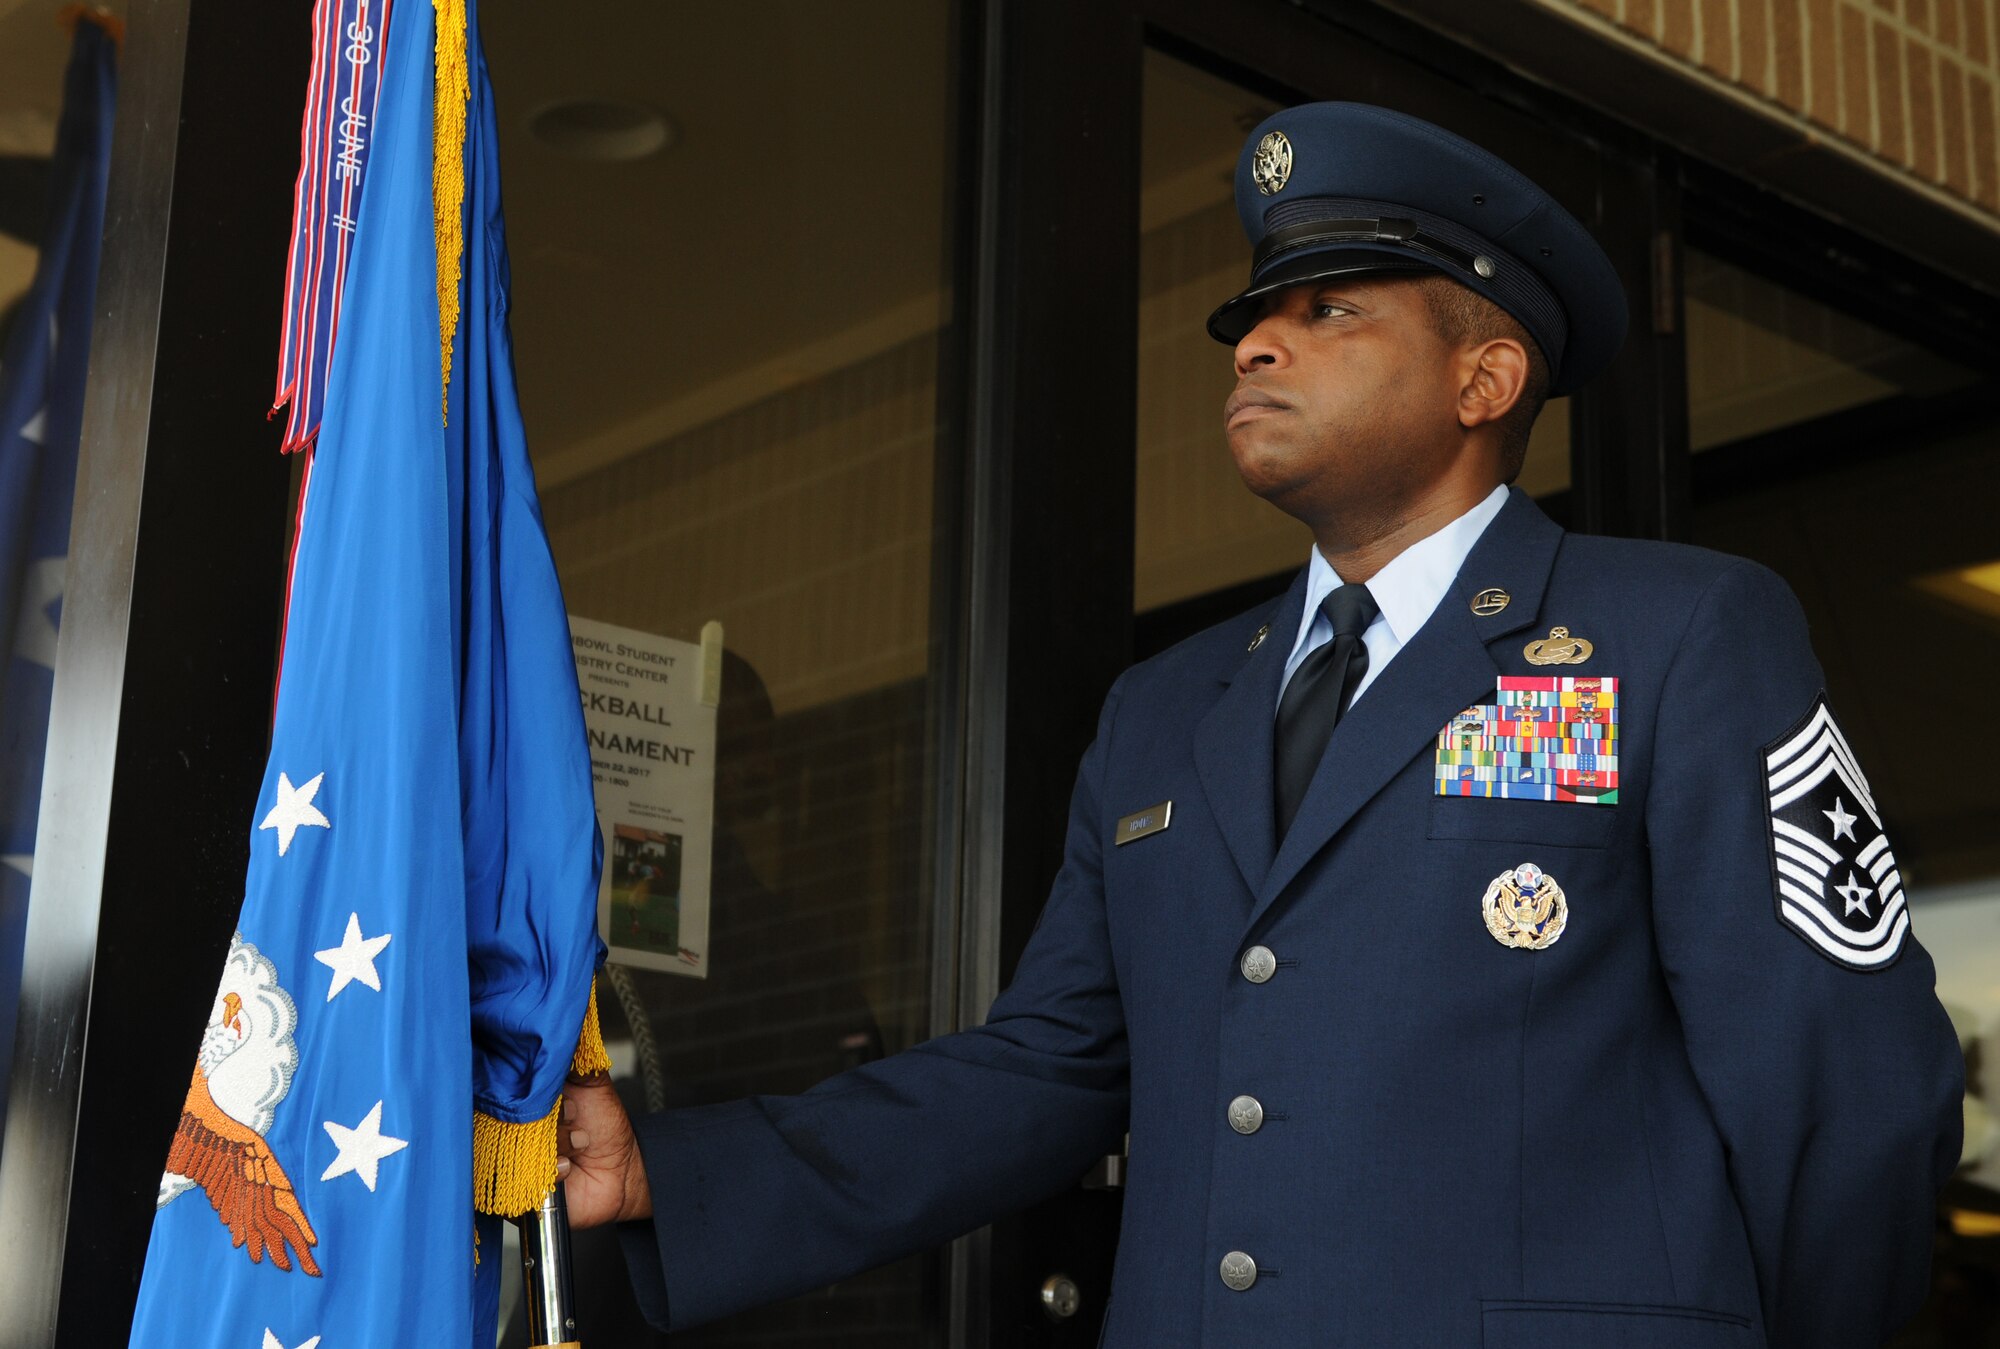 Chief Master Sgt. Farrell Thomas, 2nd Air Force command chief, holds the Air Force flag during the 2nd AF change of command ceremony at the Levitow Training Support Facility Aug. 23, 2017, on Keesler Air Force Base, Miss. Maj. Gen. Timothy Leahy took command of 2nd AF during the ceremony from Maj. Gen. Bob LaBrutta. (U.S. Air Force photo by Senior Airman Holly Mansfield)